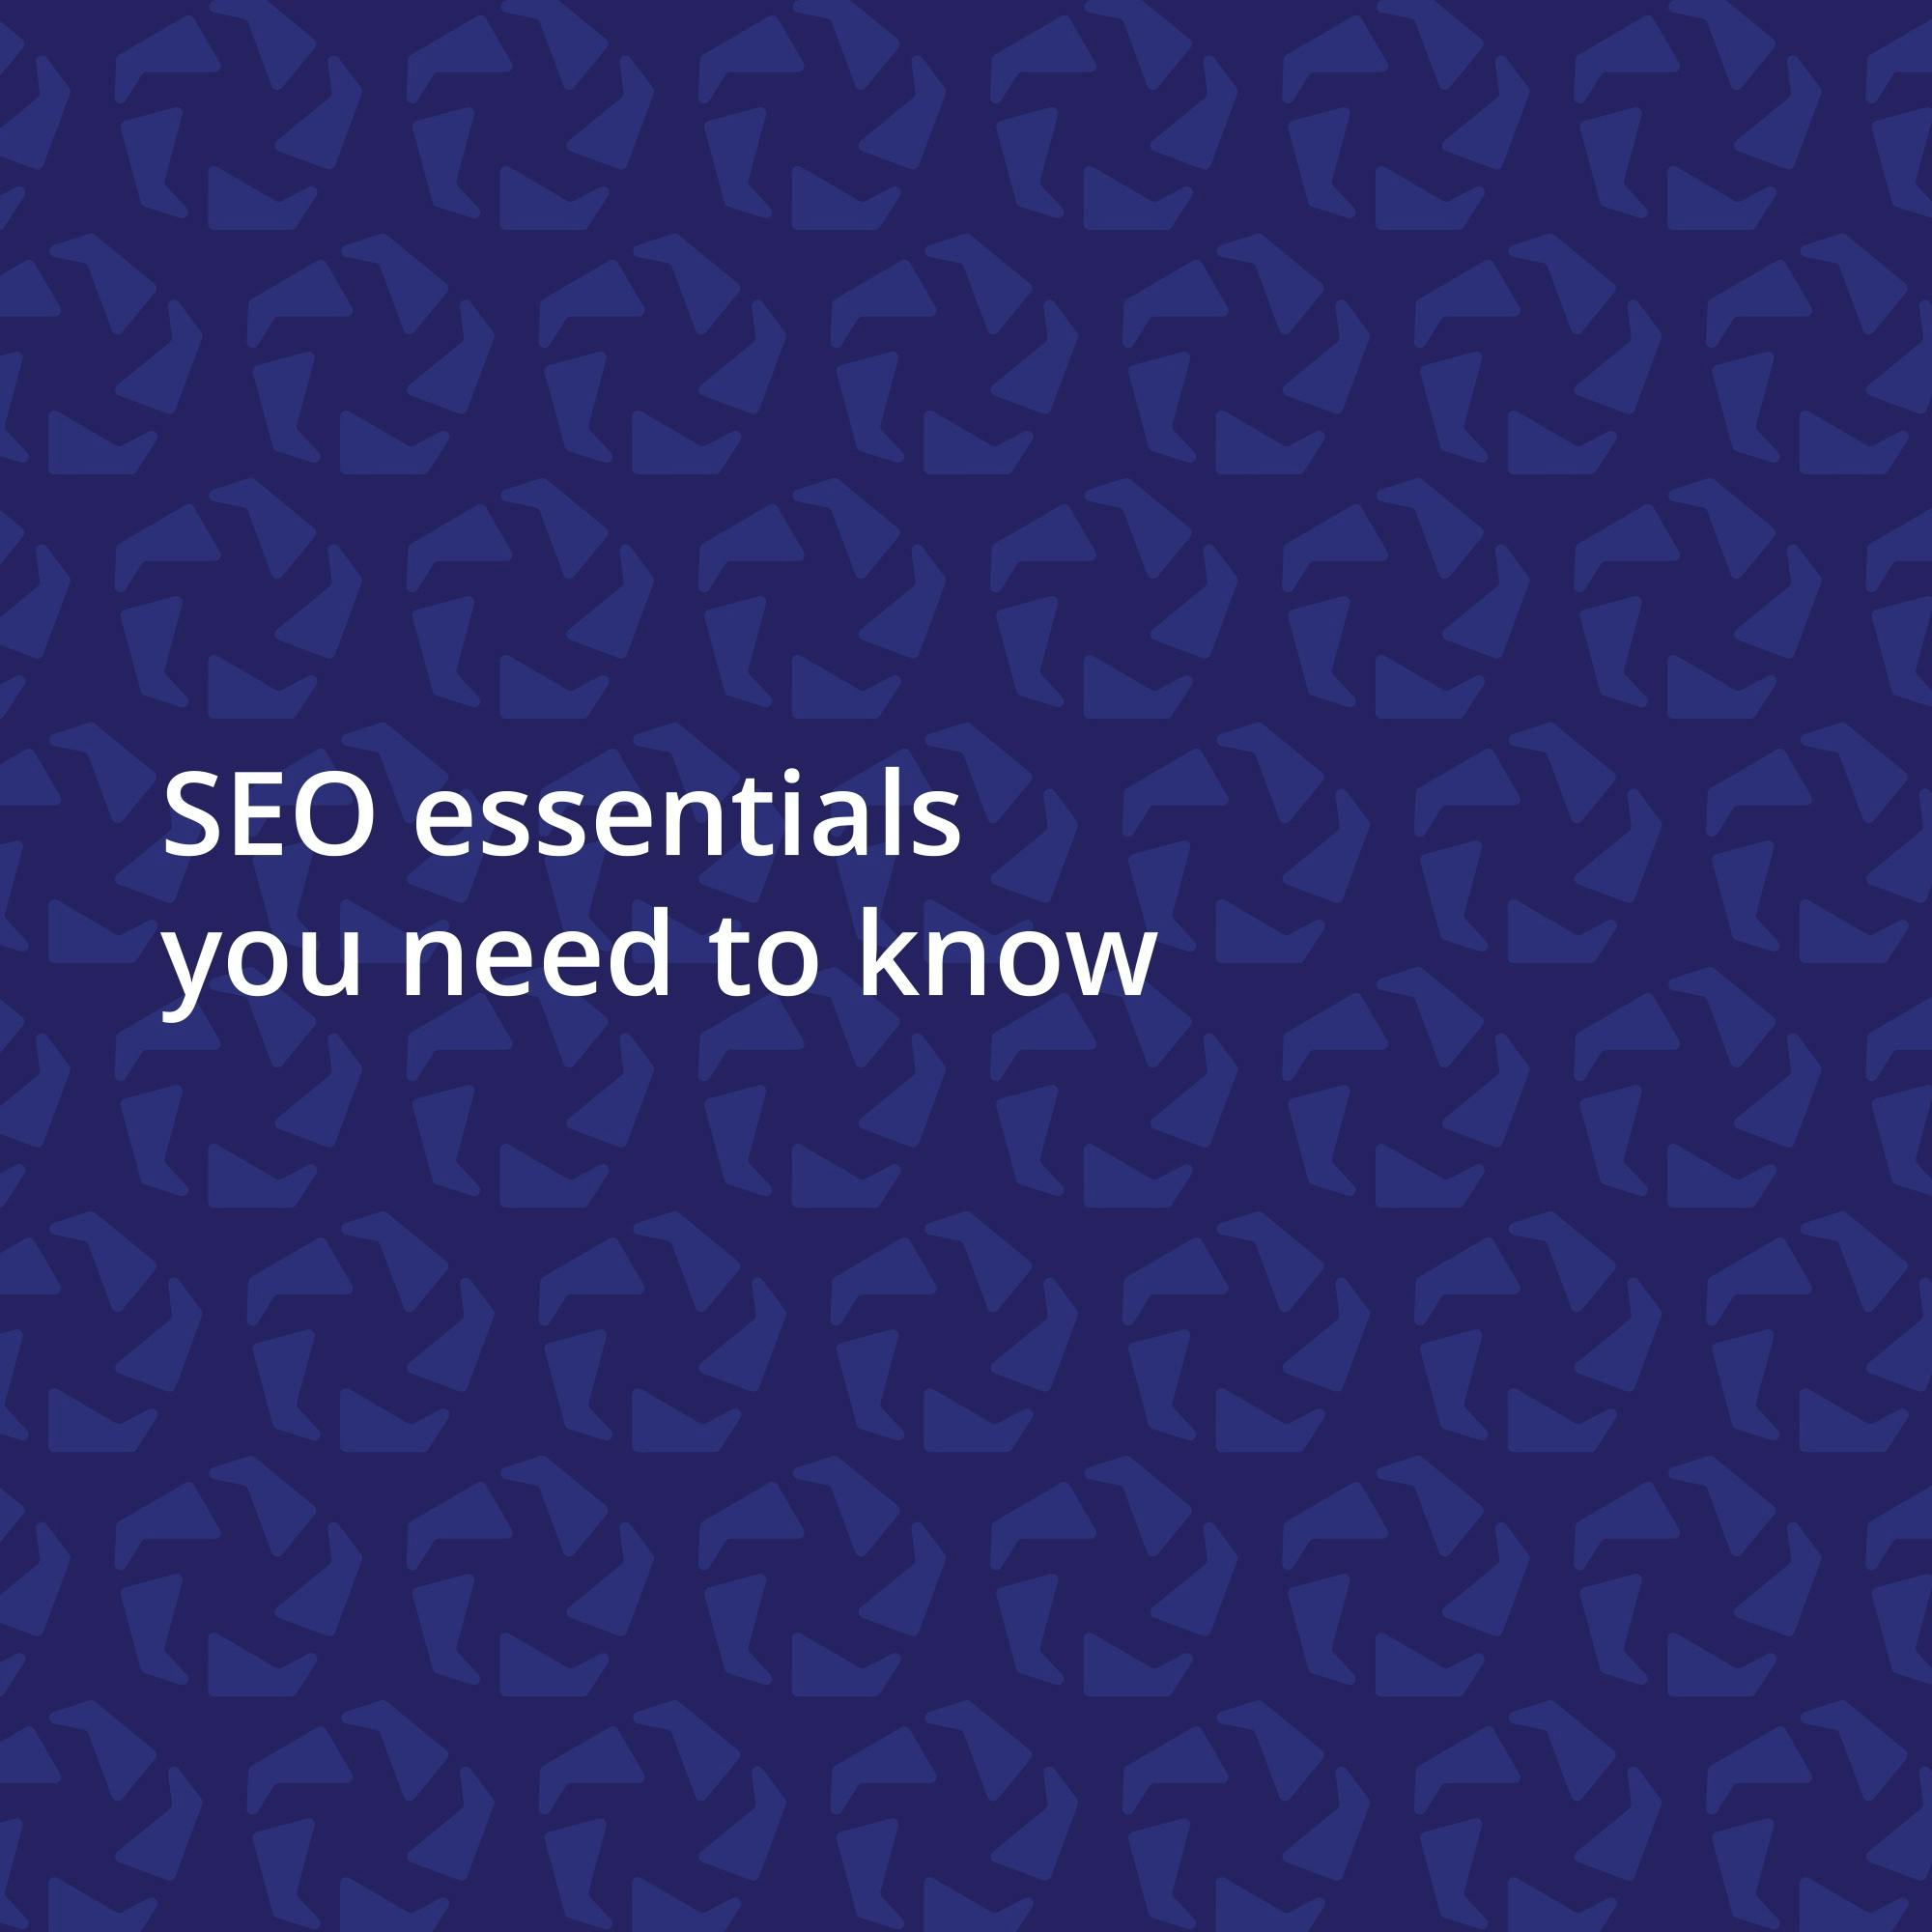 SEO essentials you need to know